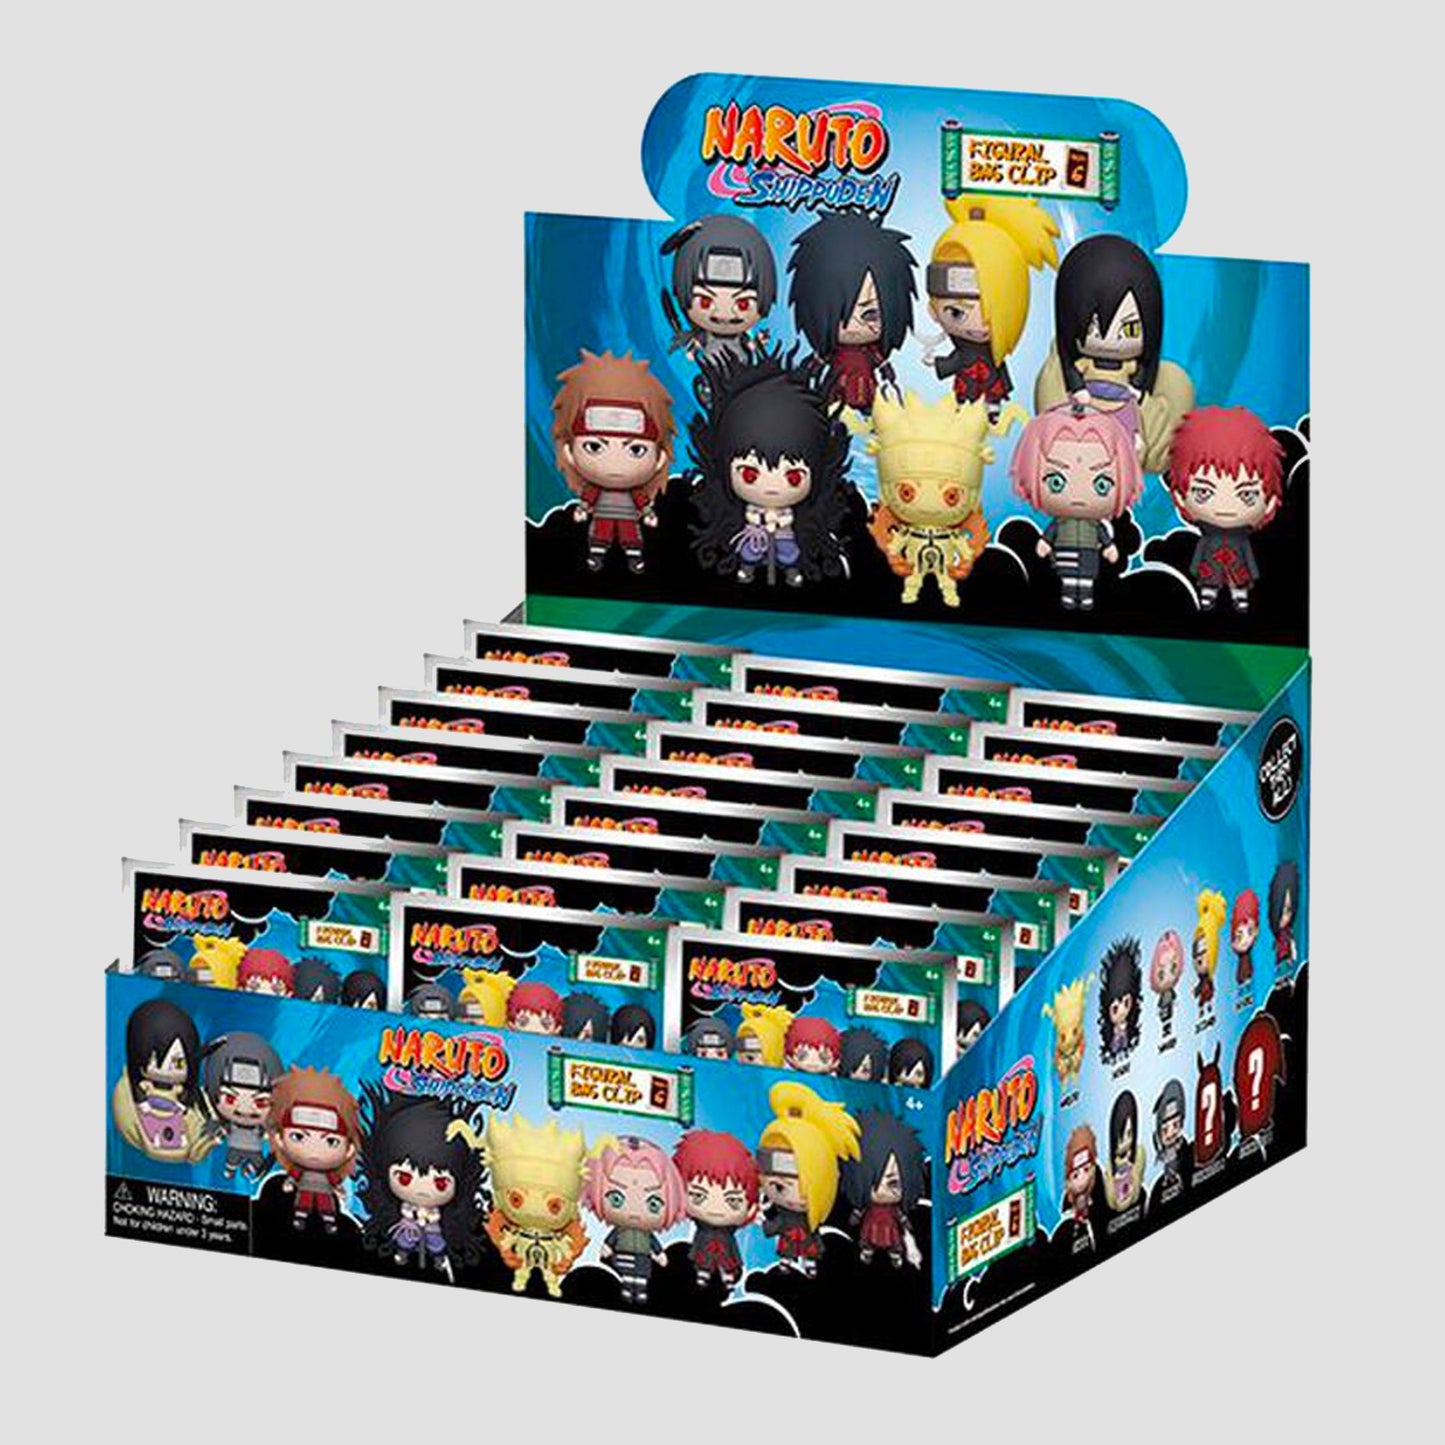 Naruto: Shippuden Hug Character Collection 3 (Set of 6) (Anime Toy) -  HobbySearch Anime Goods Store